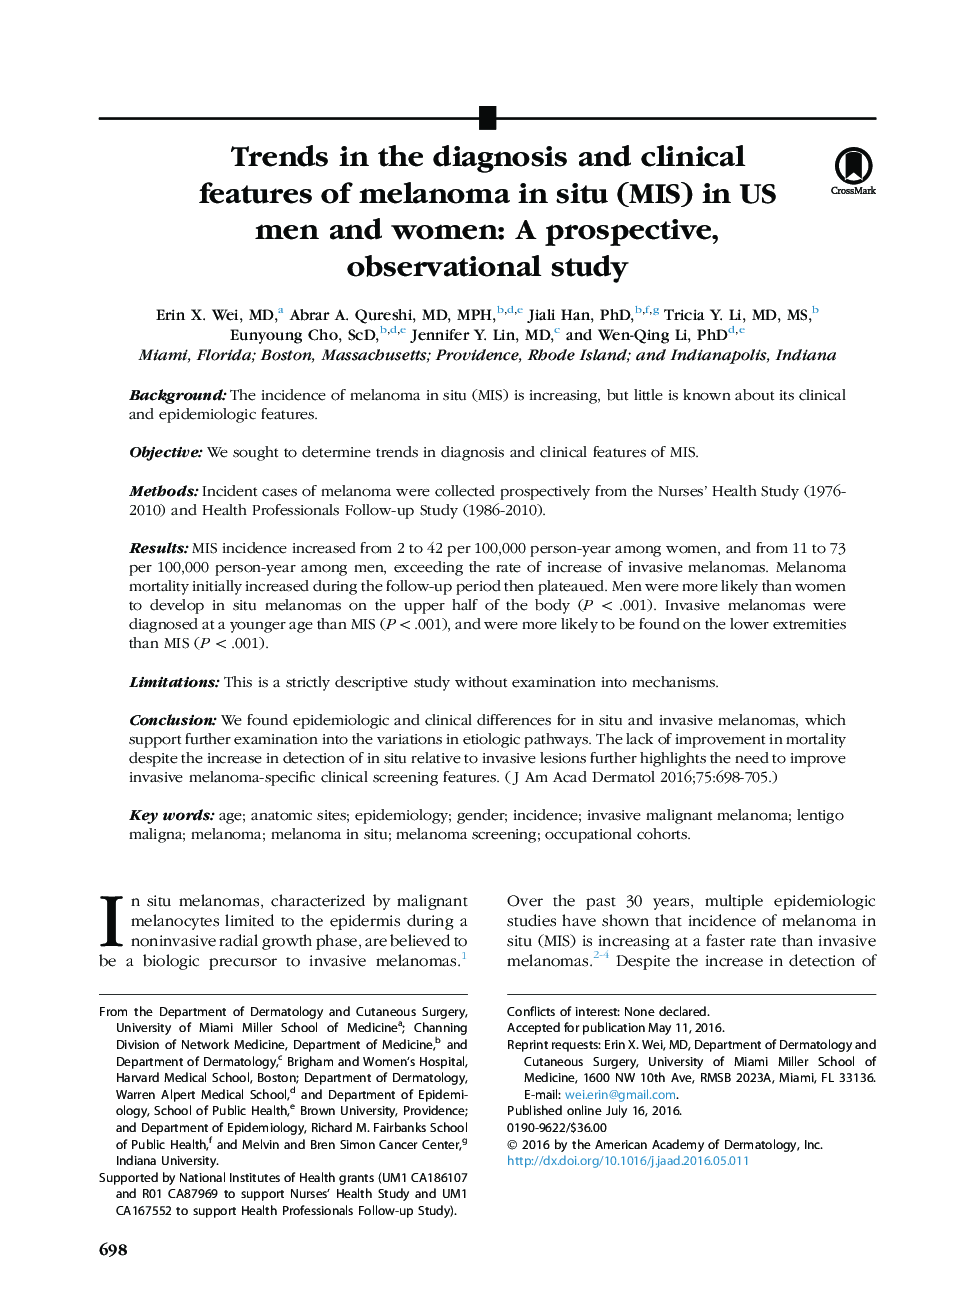 Trends in the diagnosis and clinical features of melanoma in situ (MIS) in US men and women: A prospective, observational study